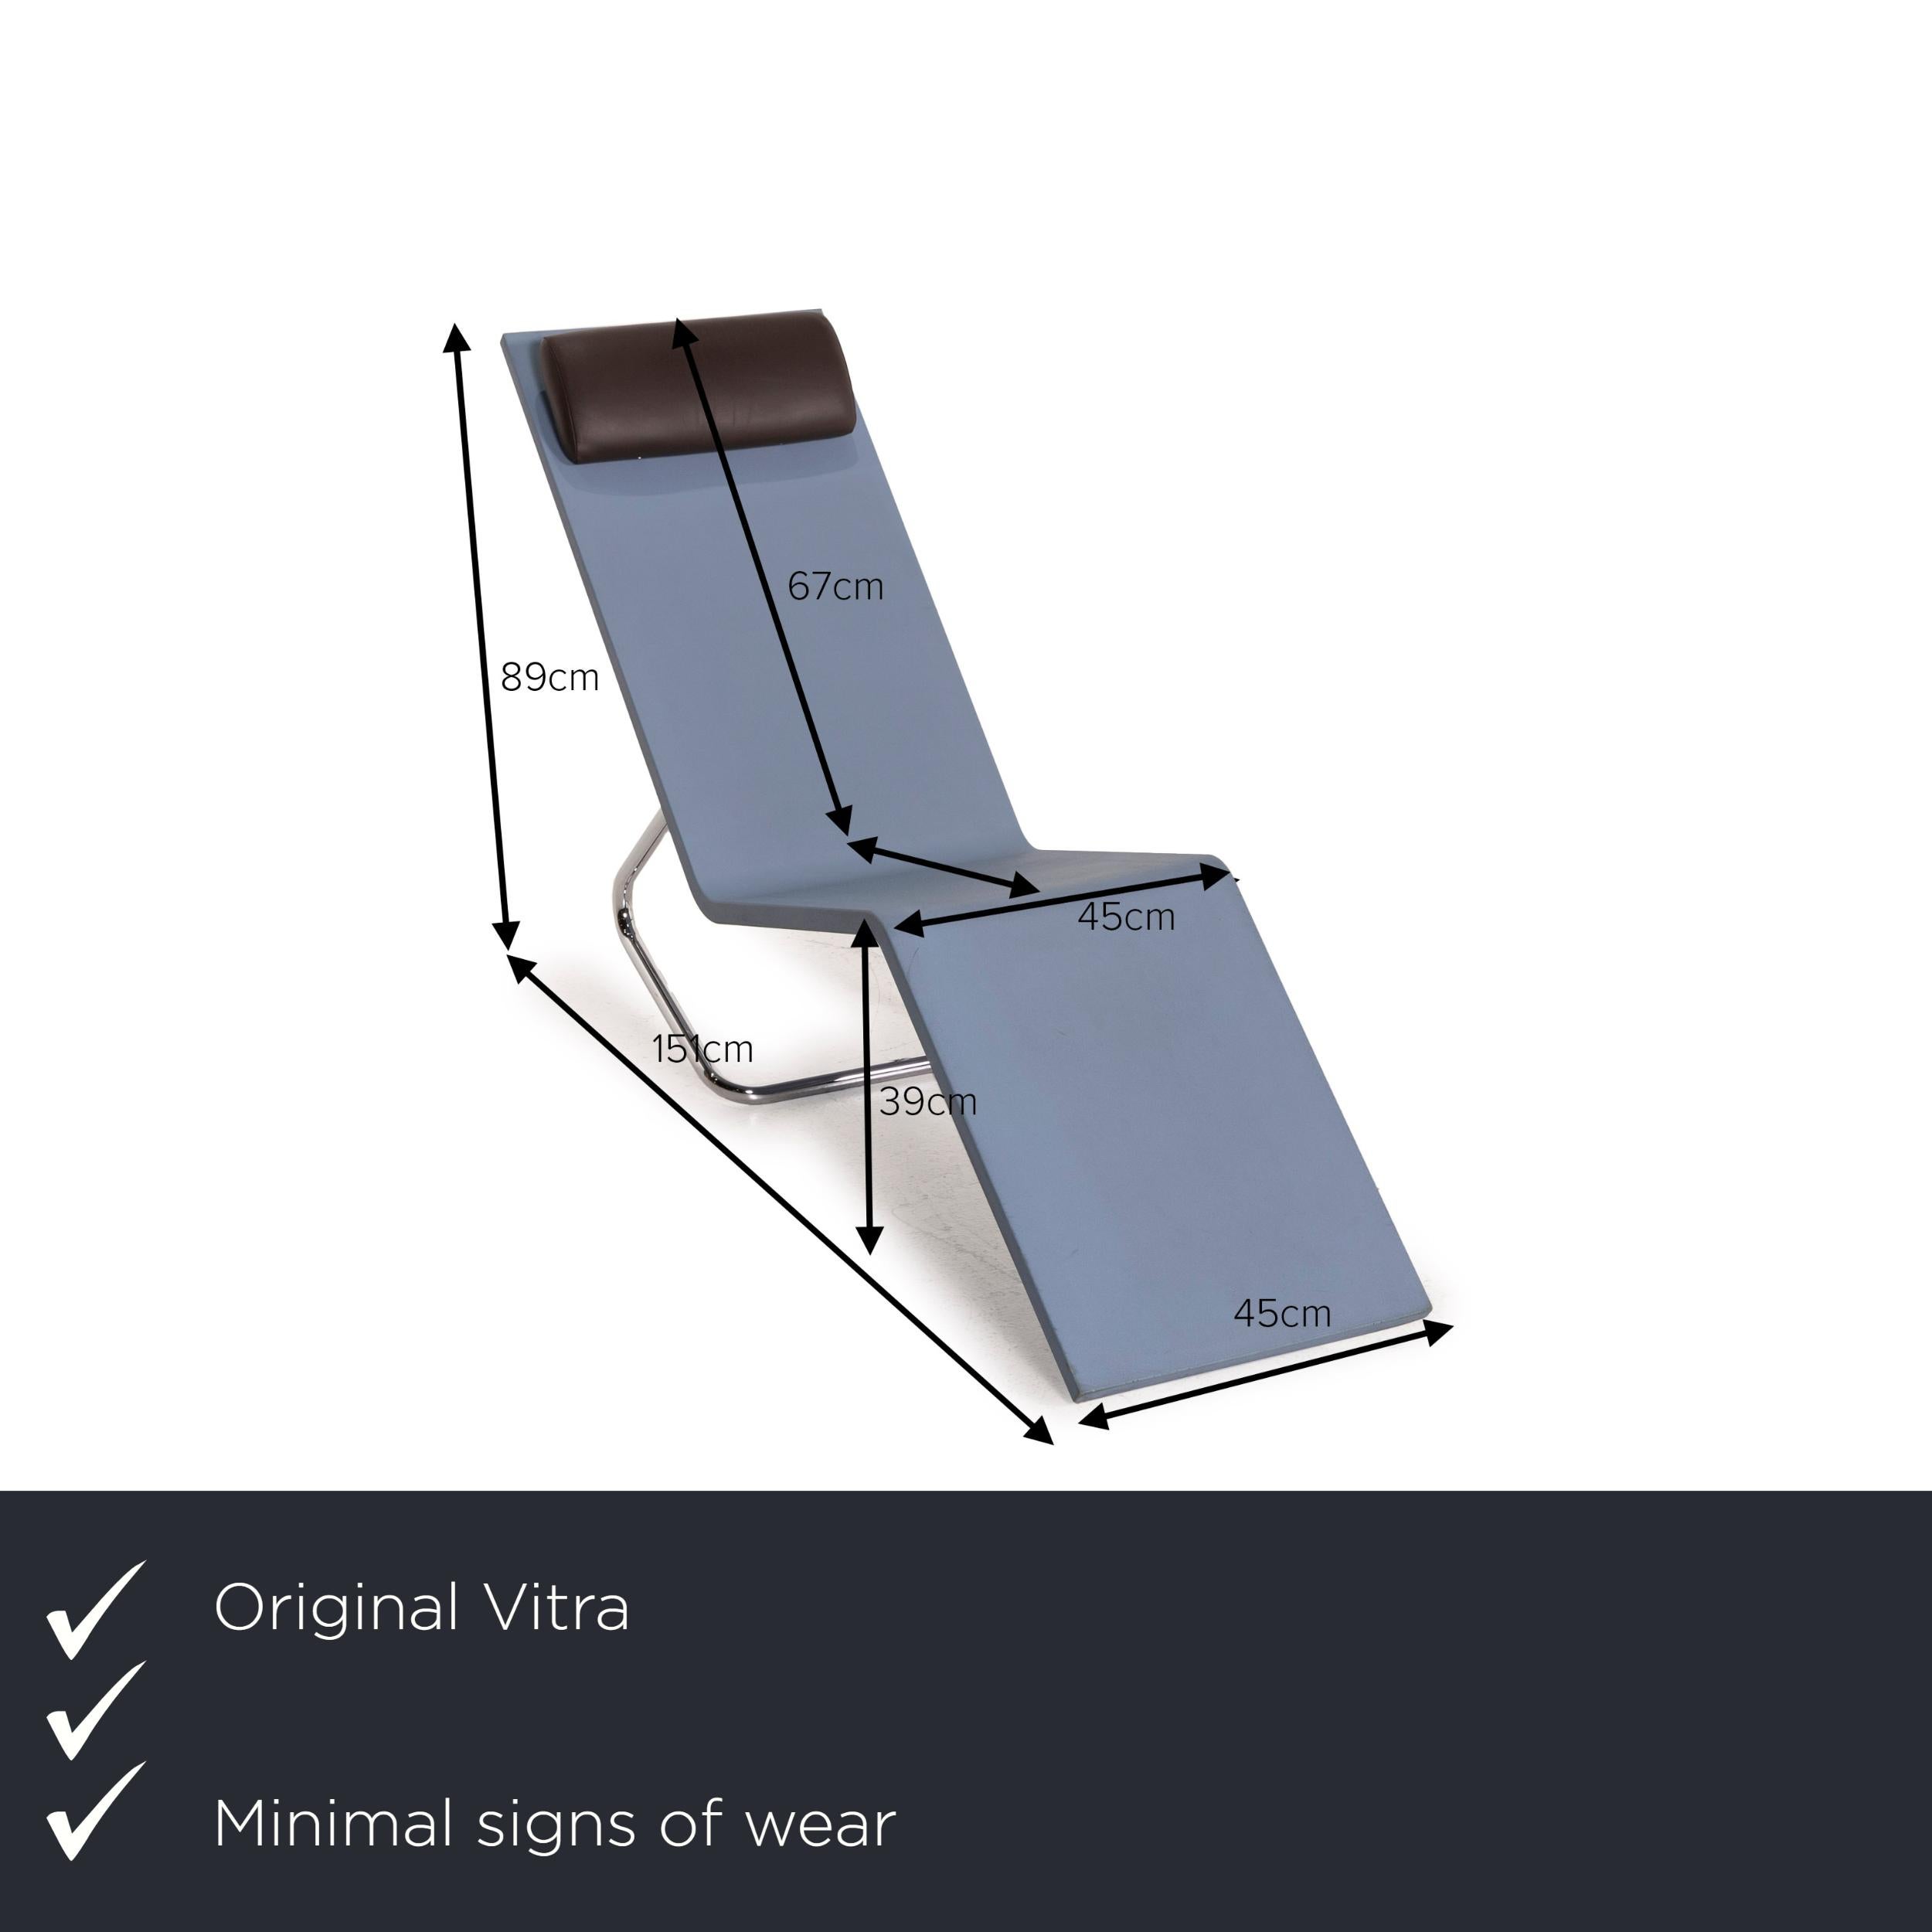 We present to you a Vitra MVS chaise polyethuran lounger blue ice blue stainless steel.
  
 

 Product measurements in centimeters:
 

 depth: 151
 width: 45
 height: 89
 seat height: 39
seat depth: 83
 seat width: 45
 back height: